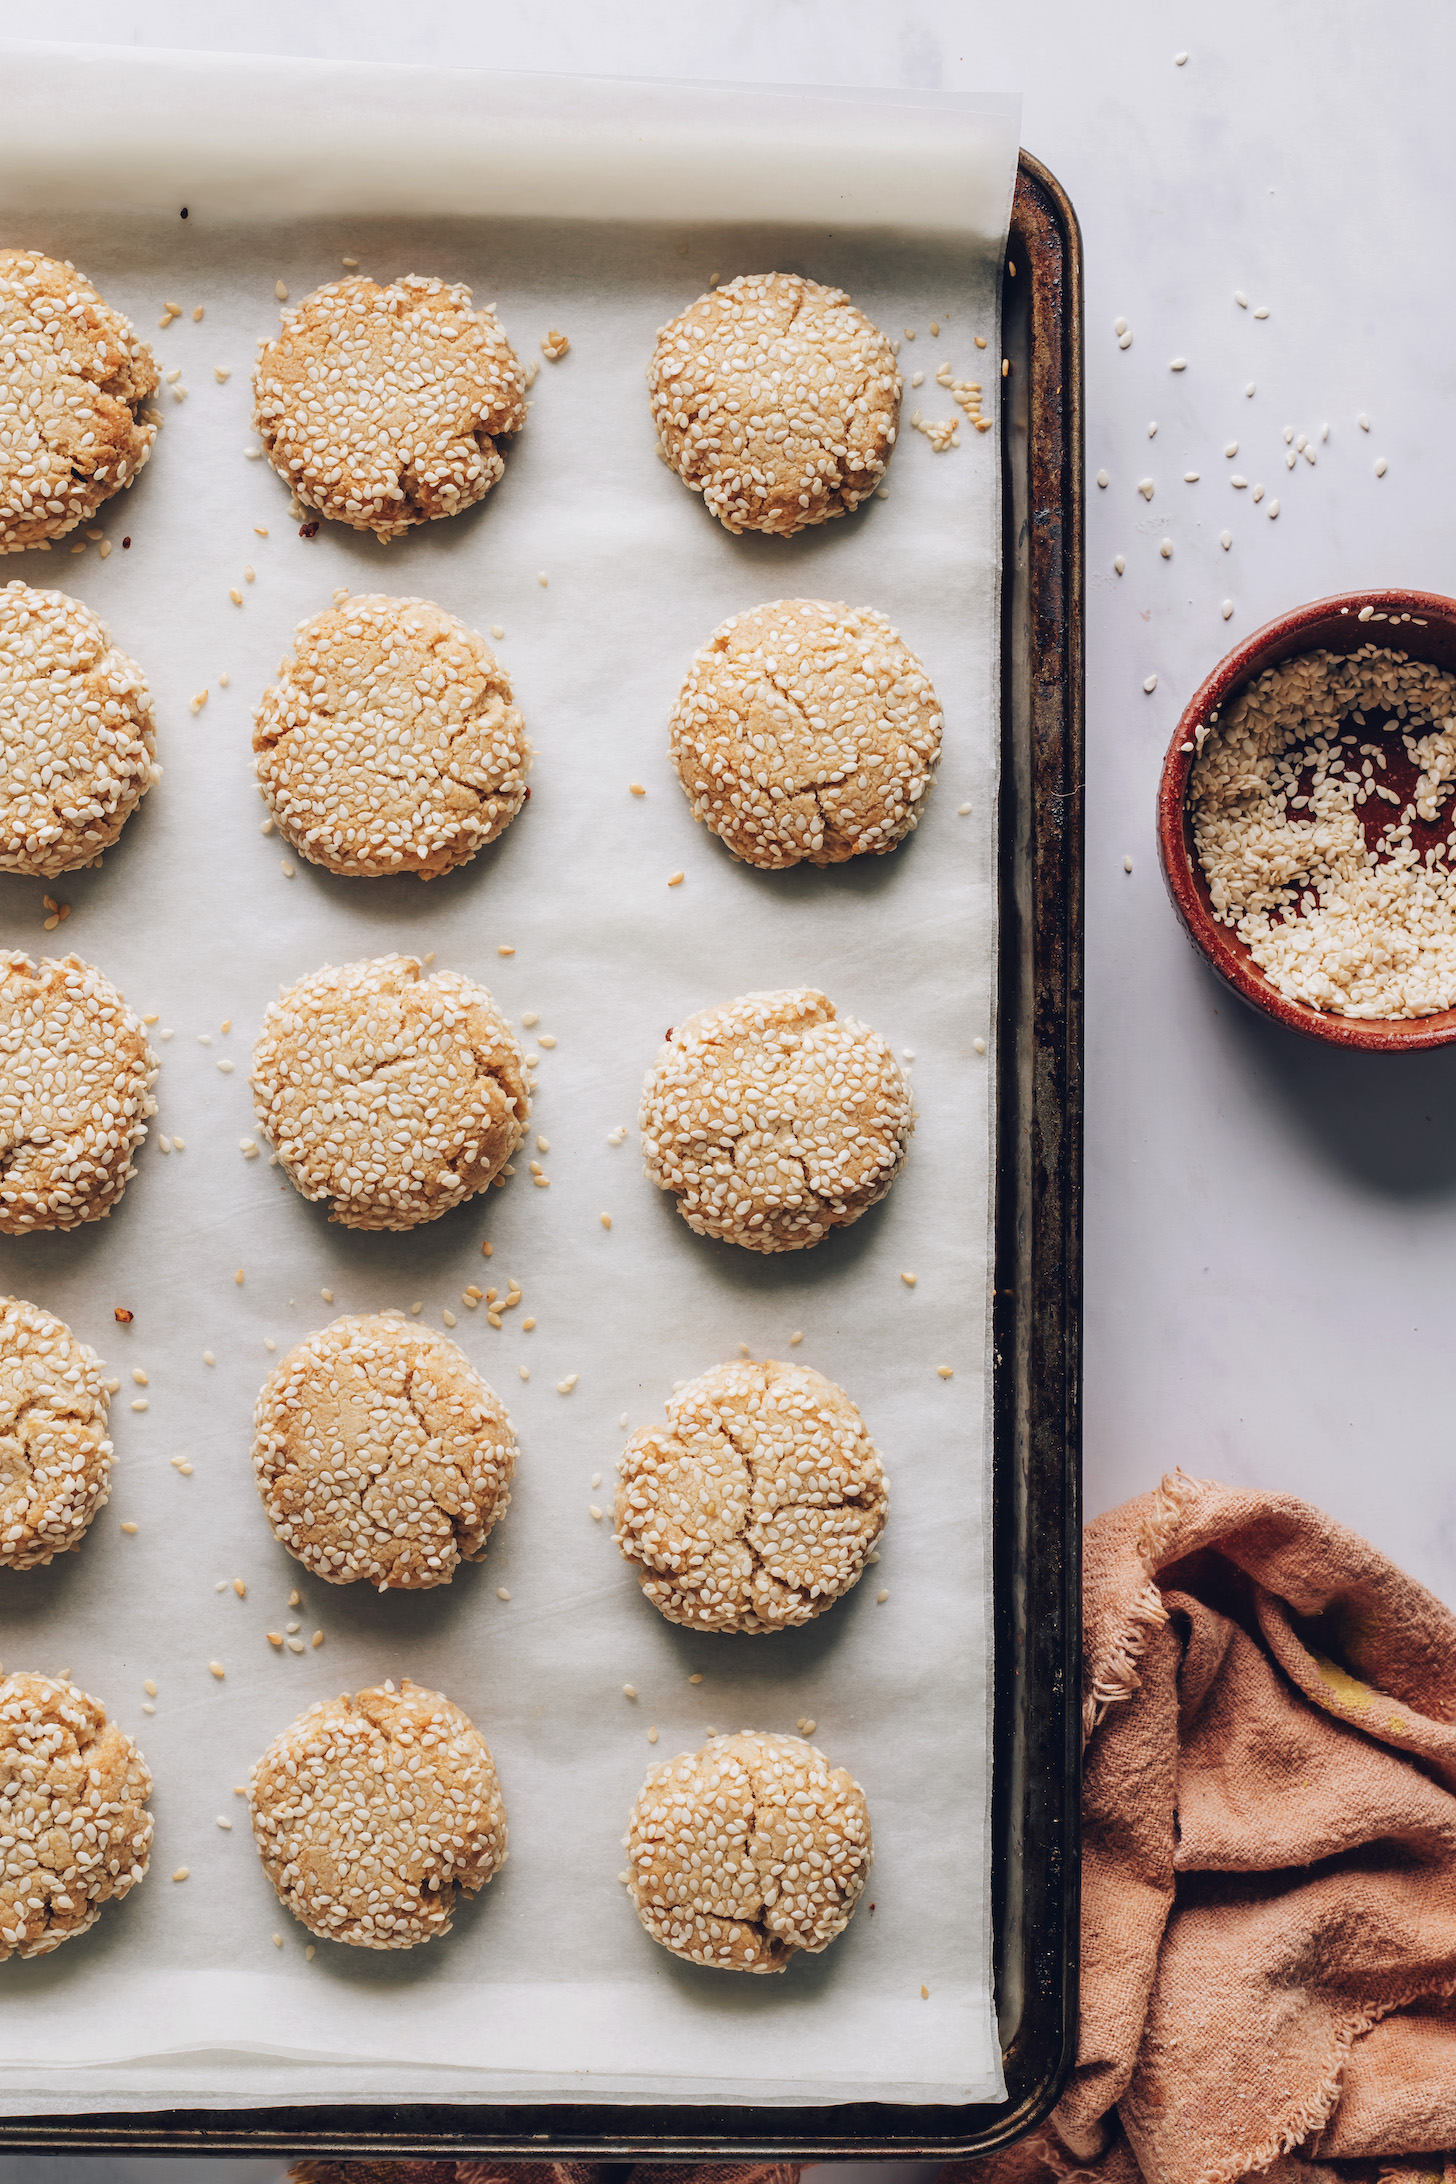 Baking sheet with baked tahini cookies coated in sesame seeds